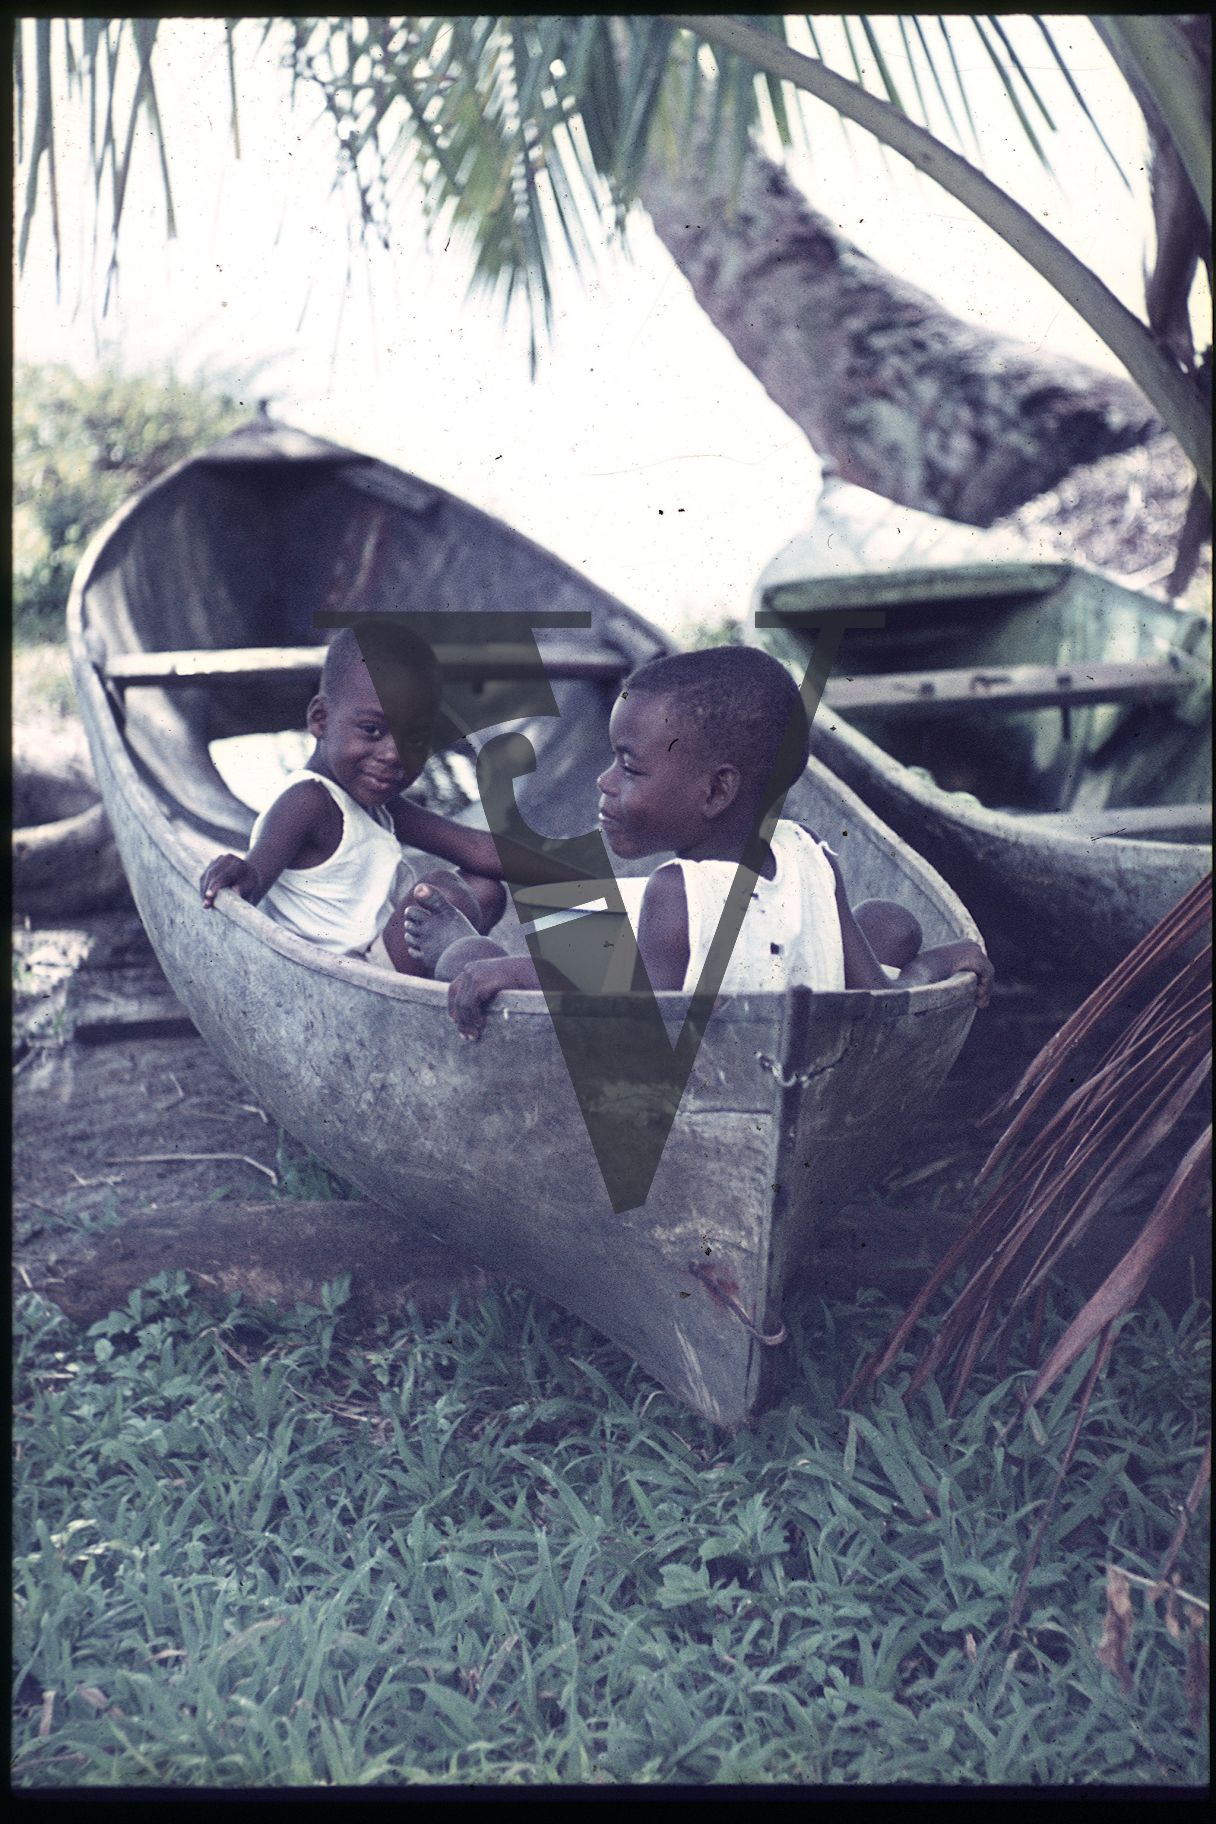 Belize, Ambergris, Two boys sat in boat, smiling.